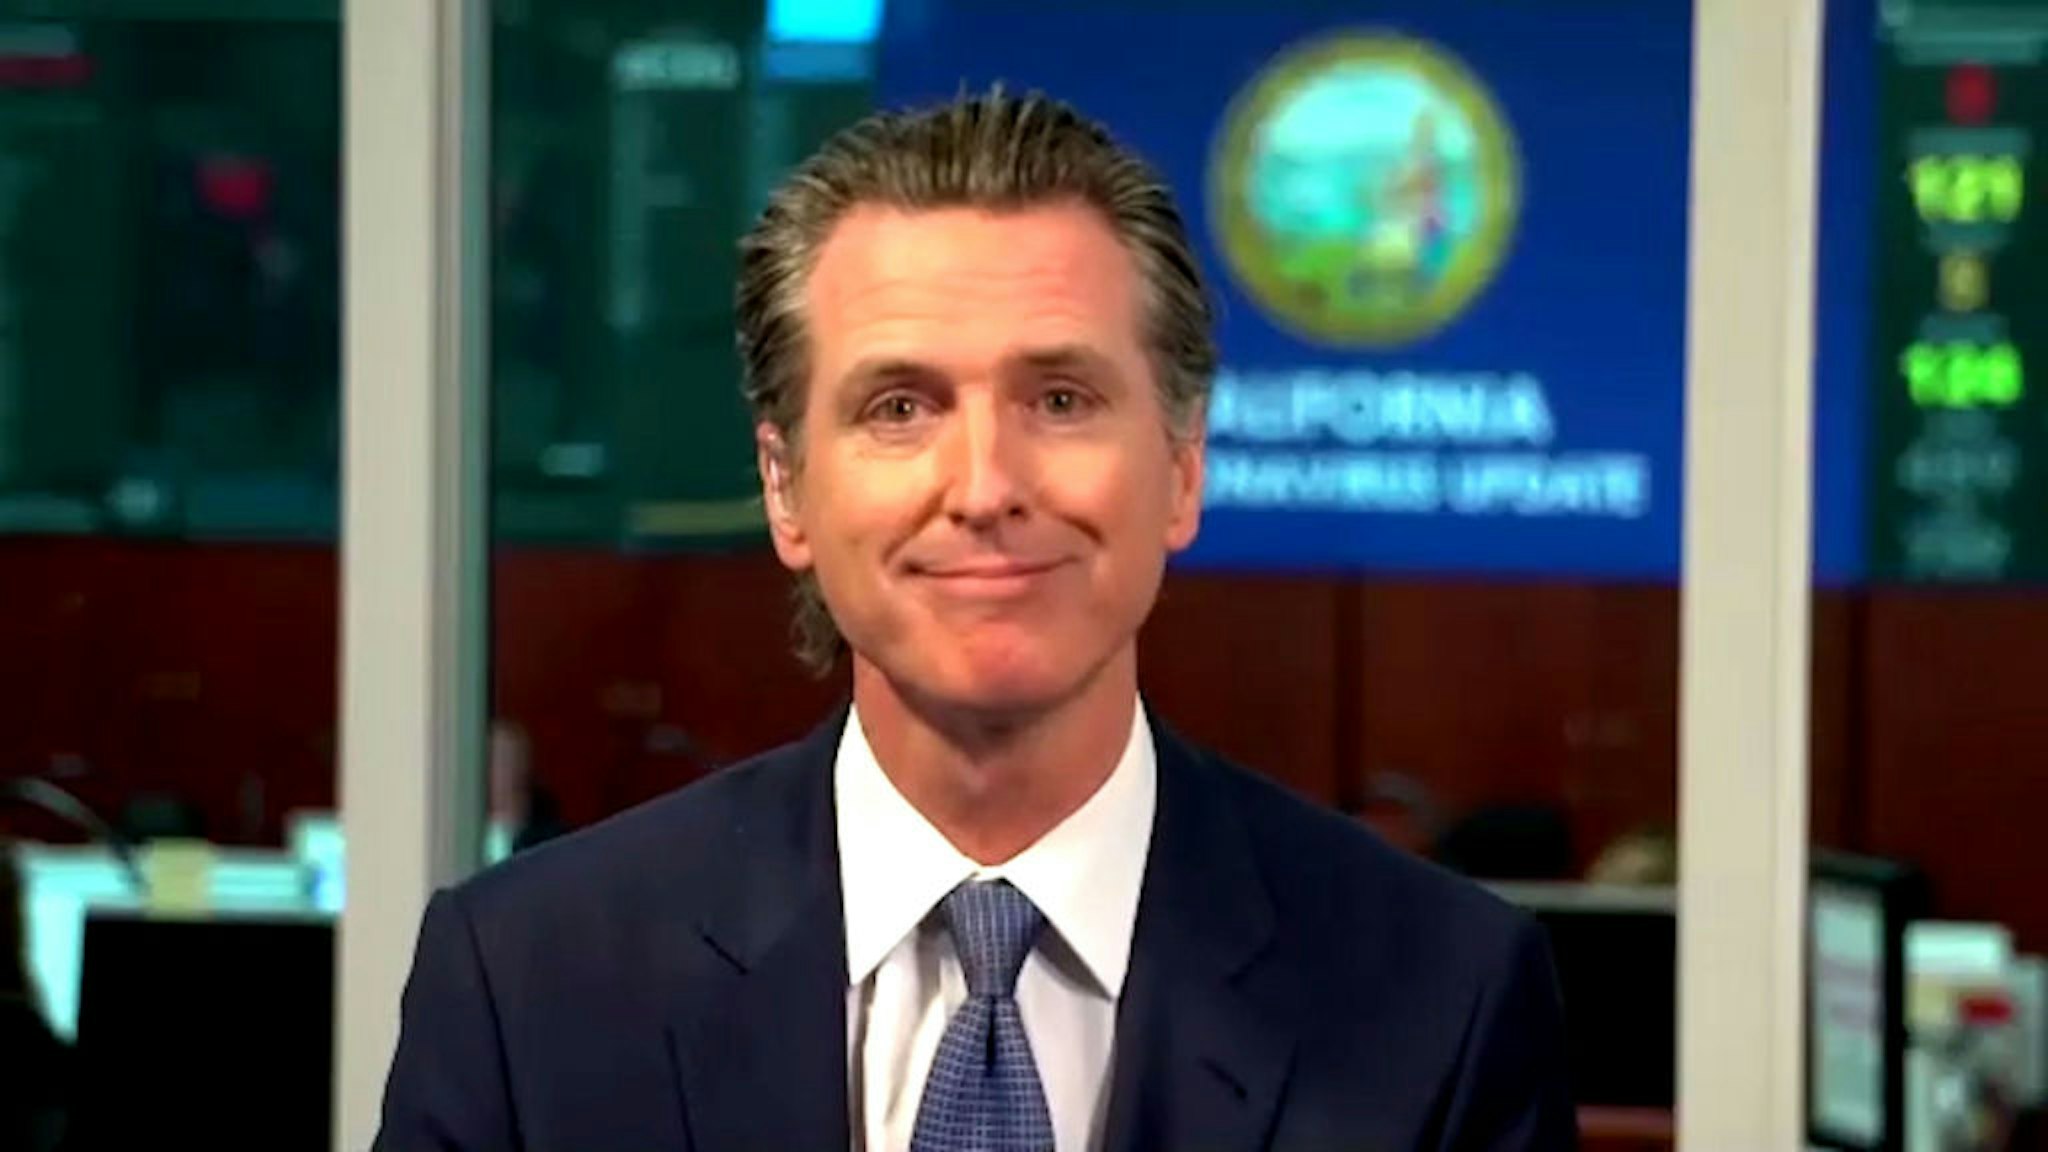 LATE NIGHT WITH SETH MEYERS -- Episode 980A -- Pictured in this screen grab: Gov. Gavin Newsom during an interview on April 30, 2020 -- (Photo by: NBC/NBCU Photo Bank via Getty Images)